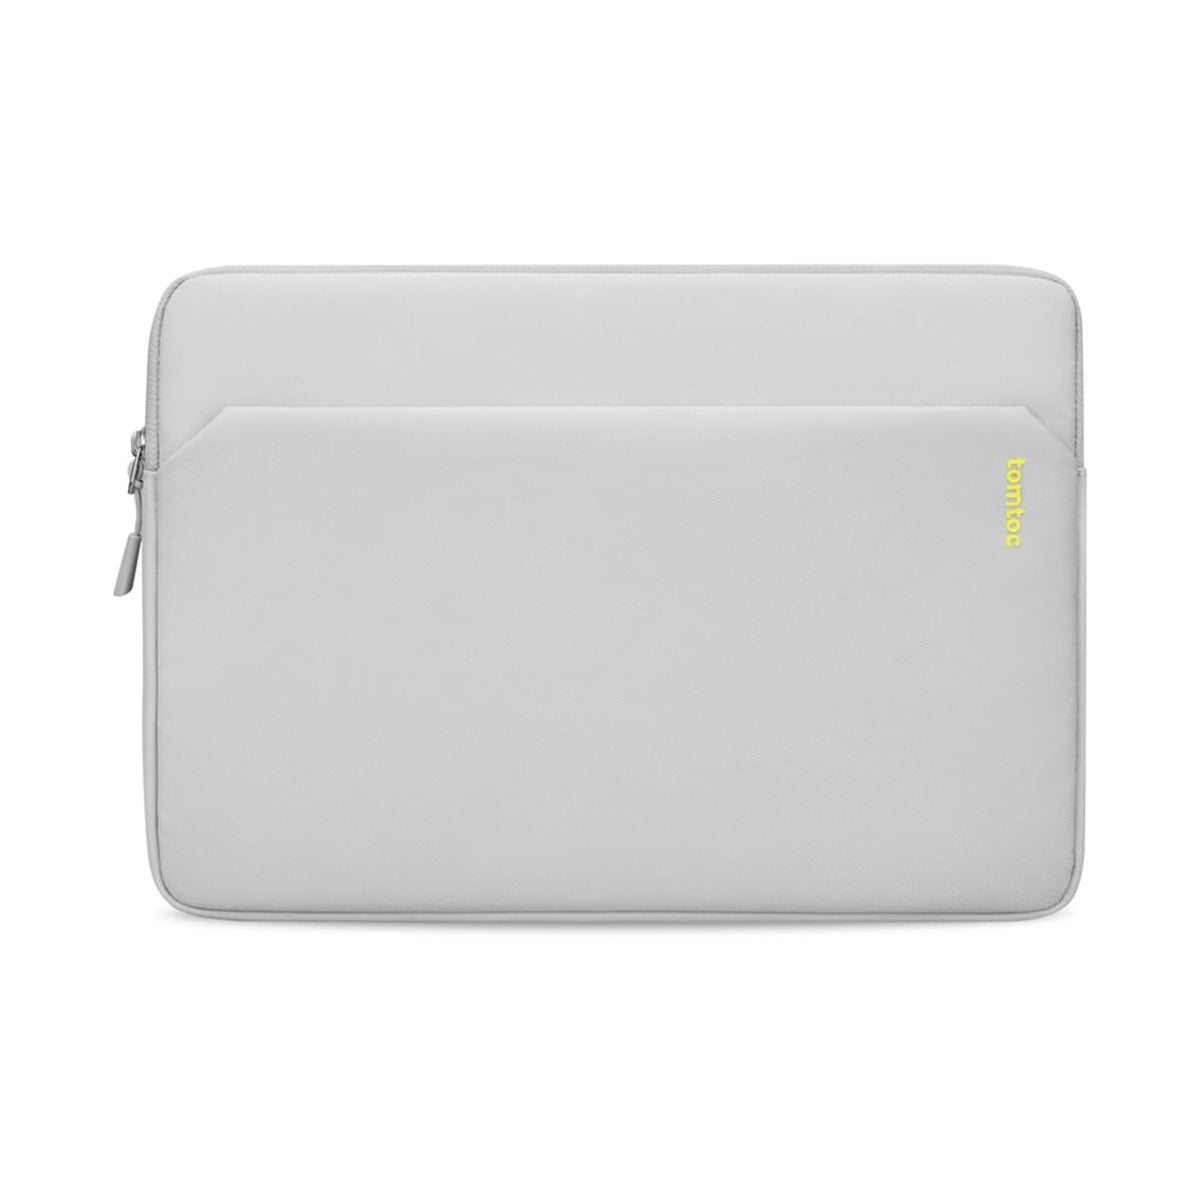 tomtoc 12.9 Inch Tablet Sleeve Bag - Pad Pro 12.9 with Magic Keyboard - Light Gray